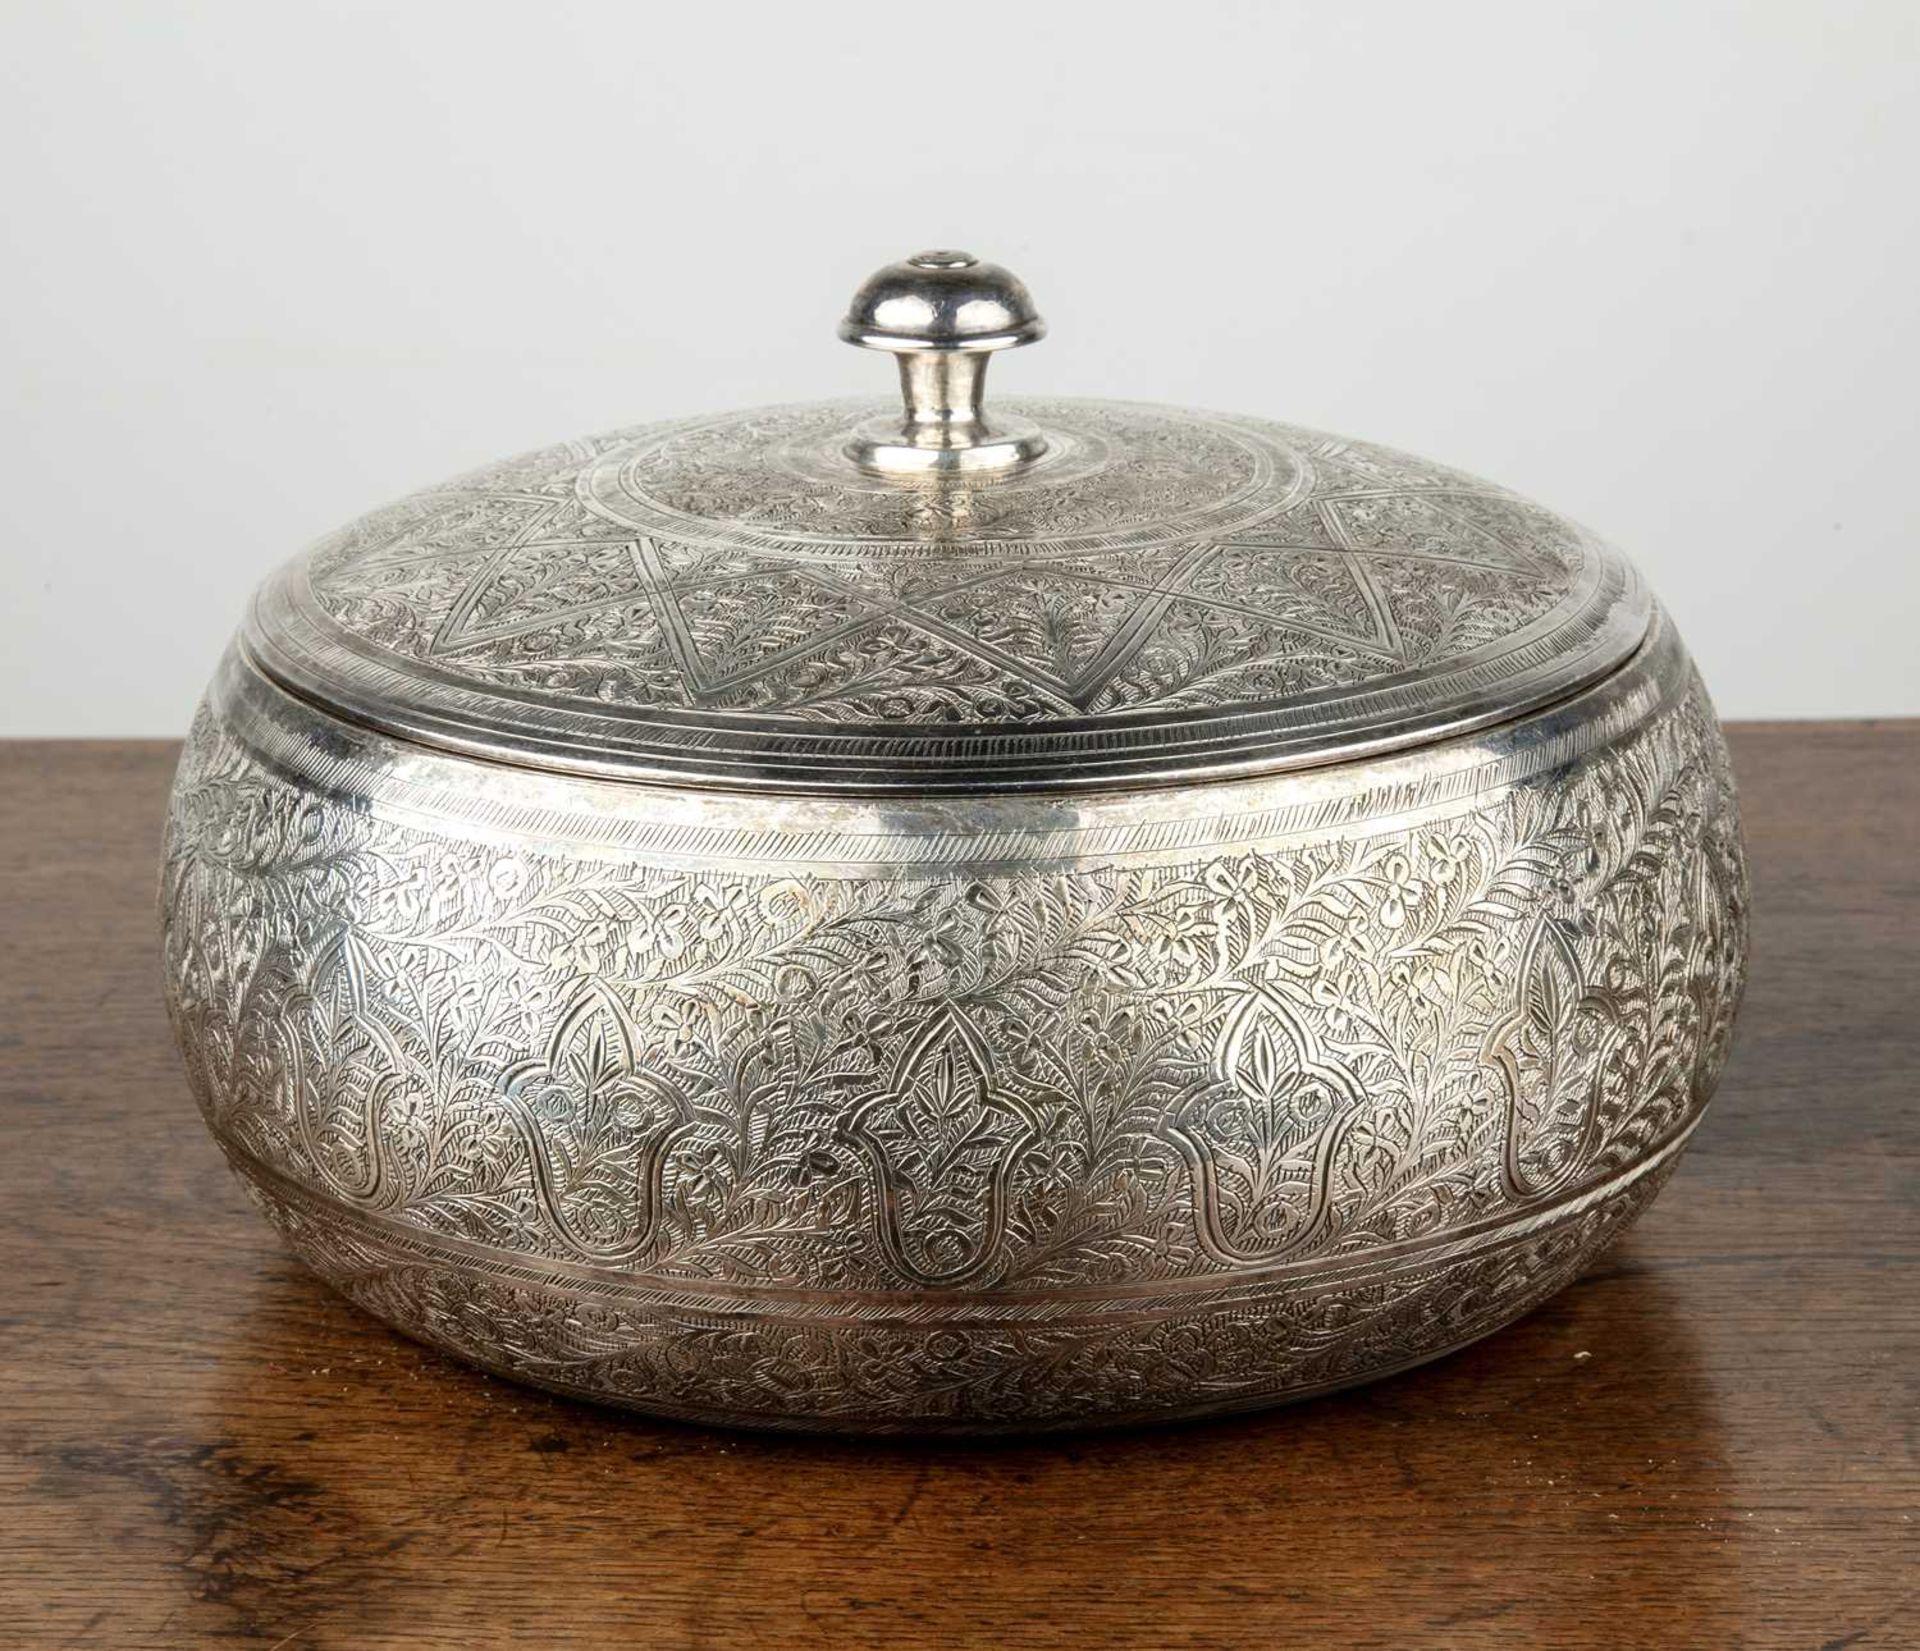 Silver plated chased bowl and cover Indian with all-over diamond and arabesque designs, 22cm - Image 2 of 5